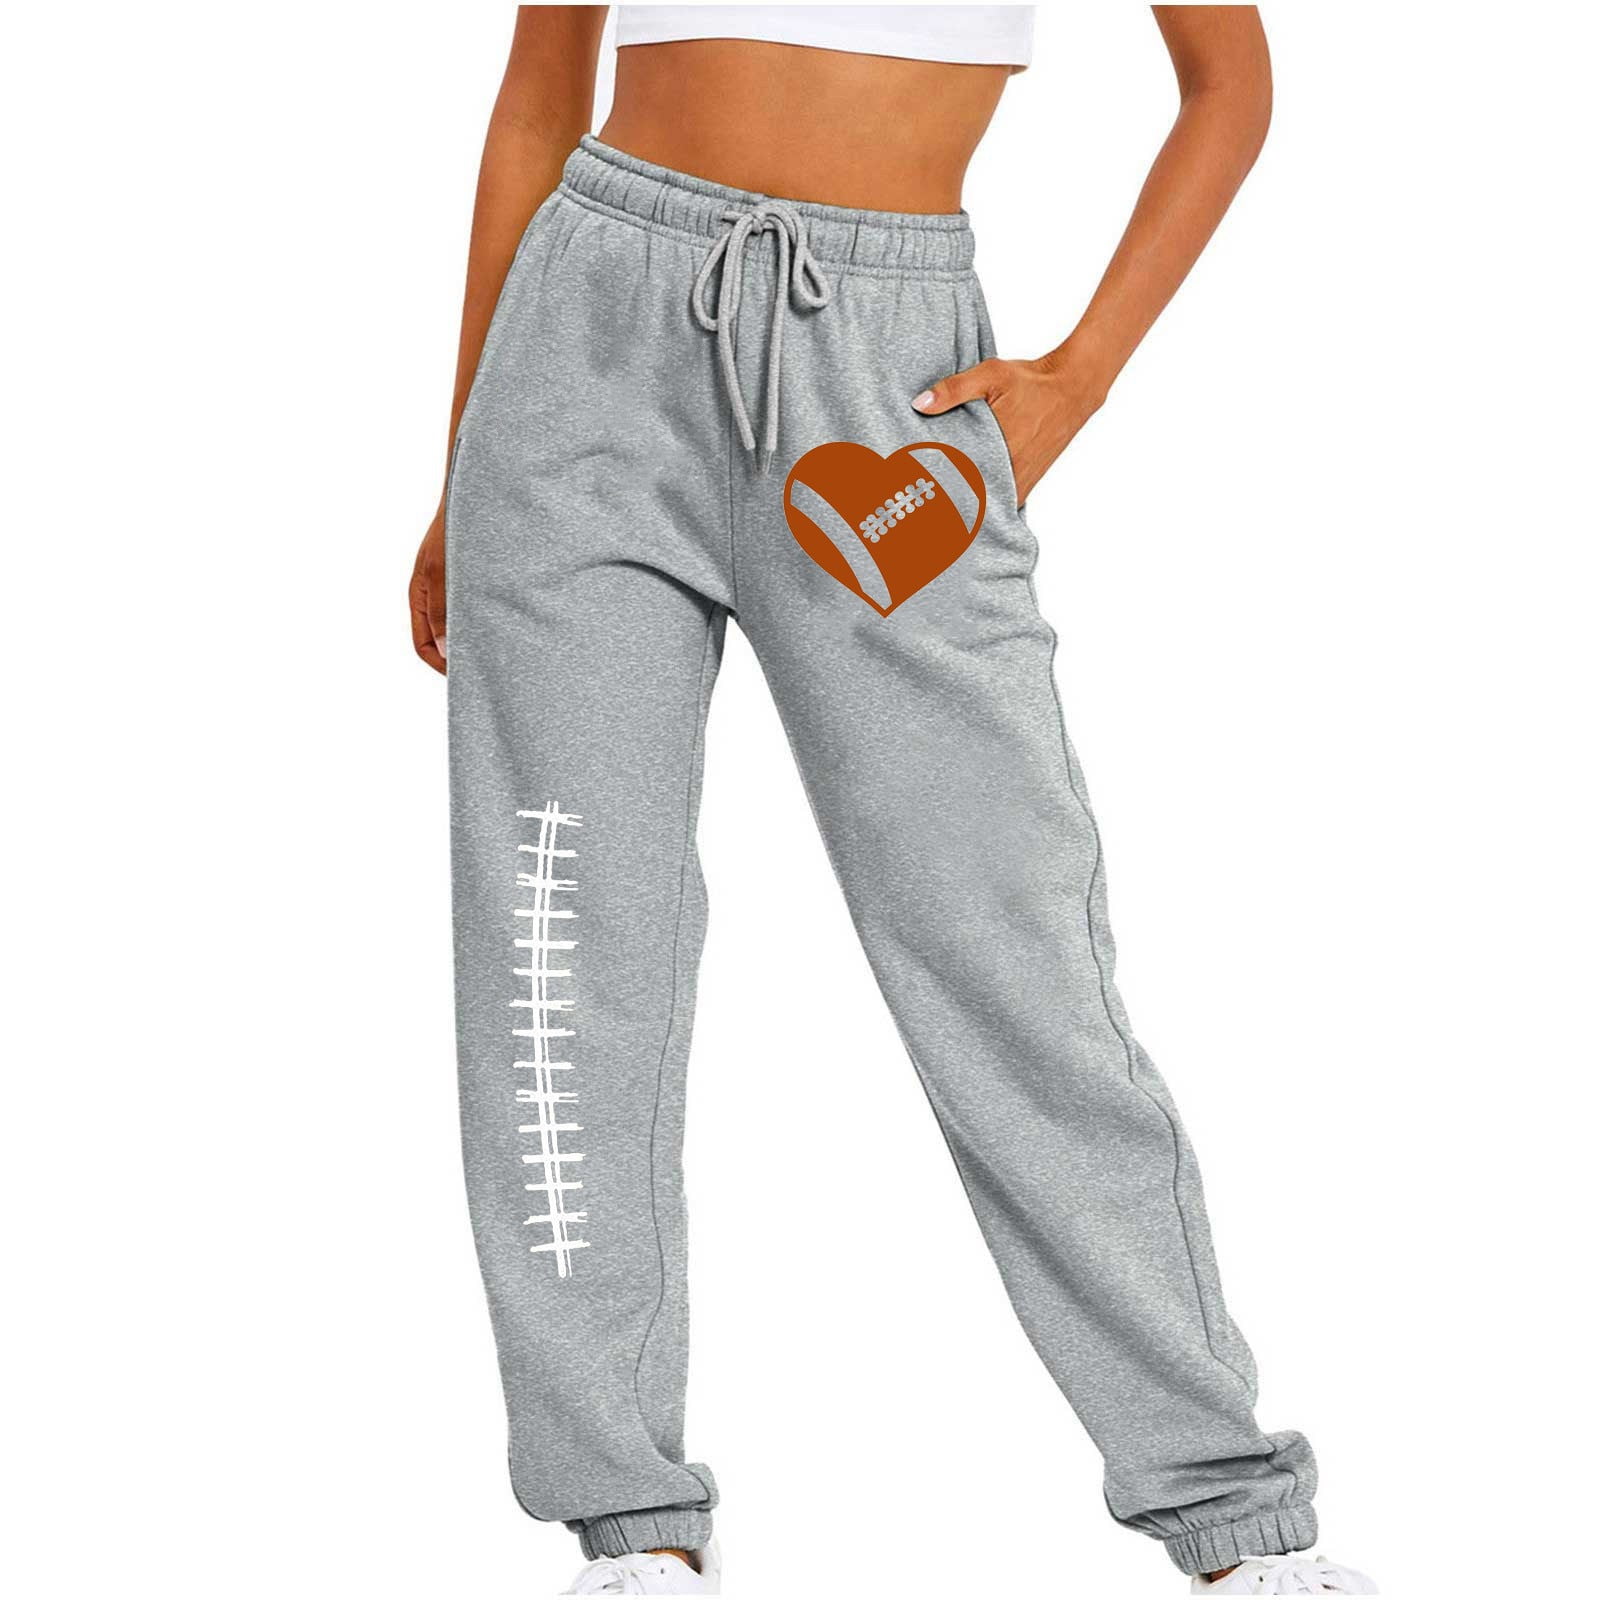 HAPIMO Savings Fall Winter Sweatpants for Women Teens Fall Fashion Outs  Casual Comfy Pants Warm Elastic High Waist Plush Solid Color Letter Print